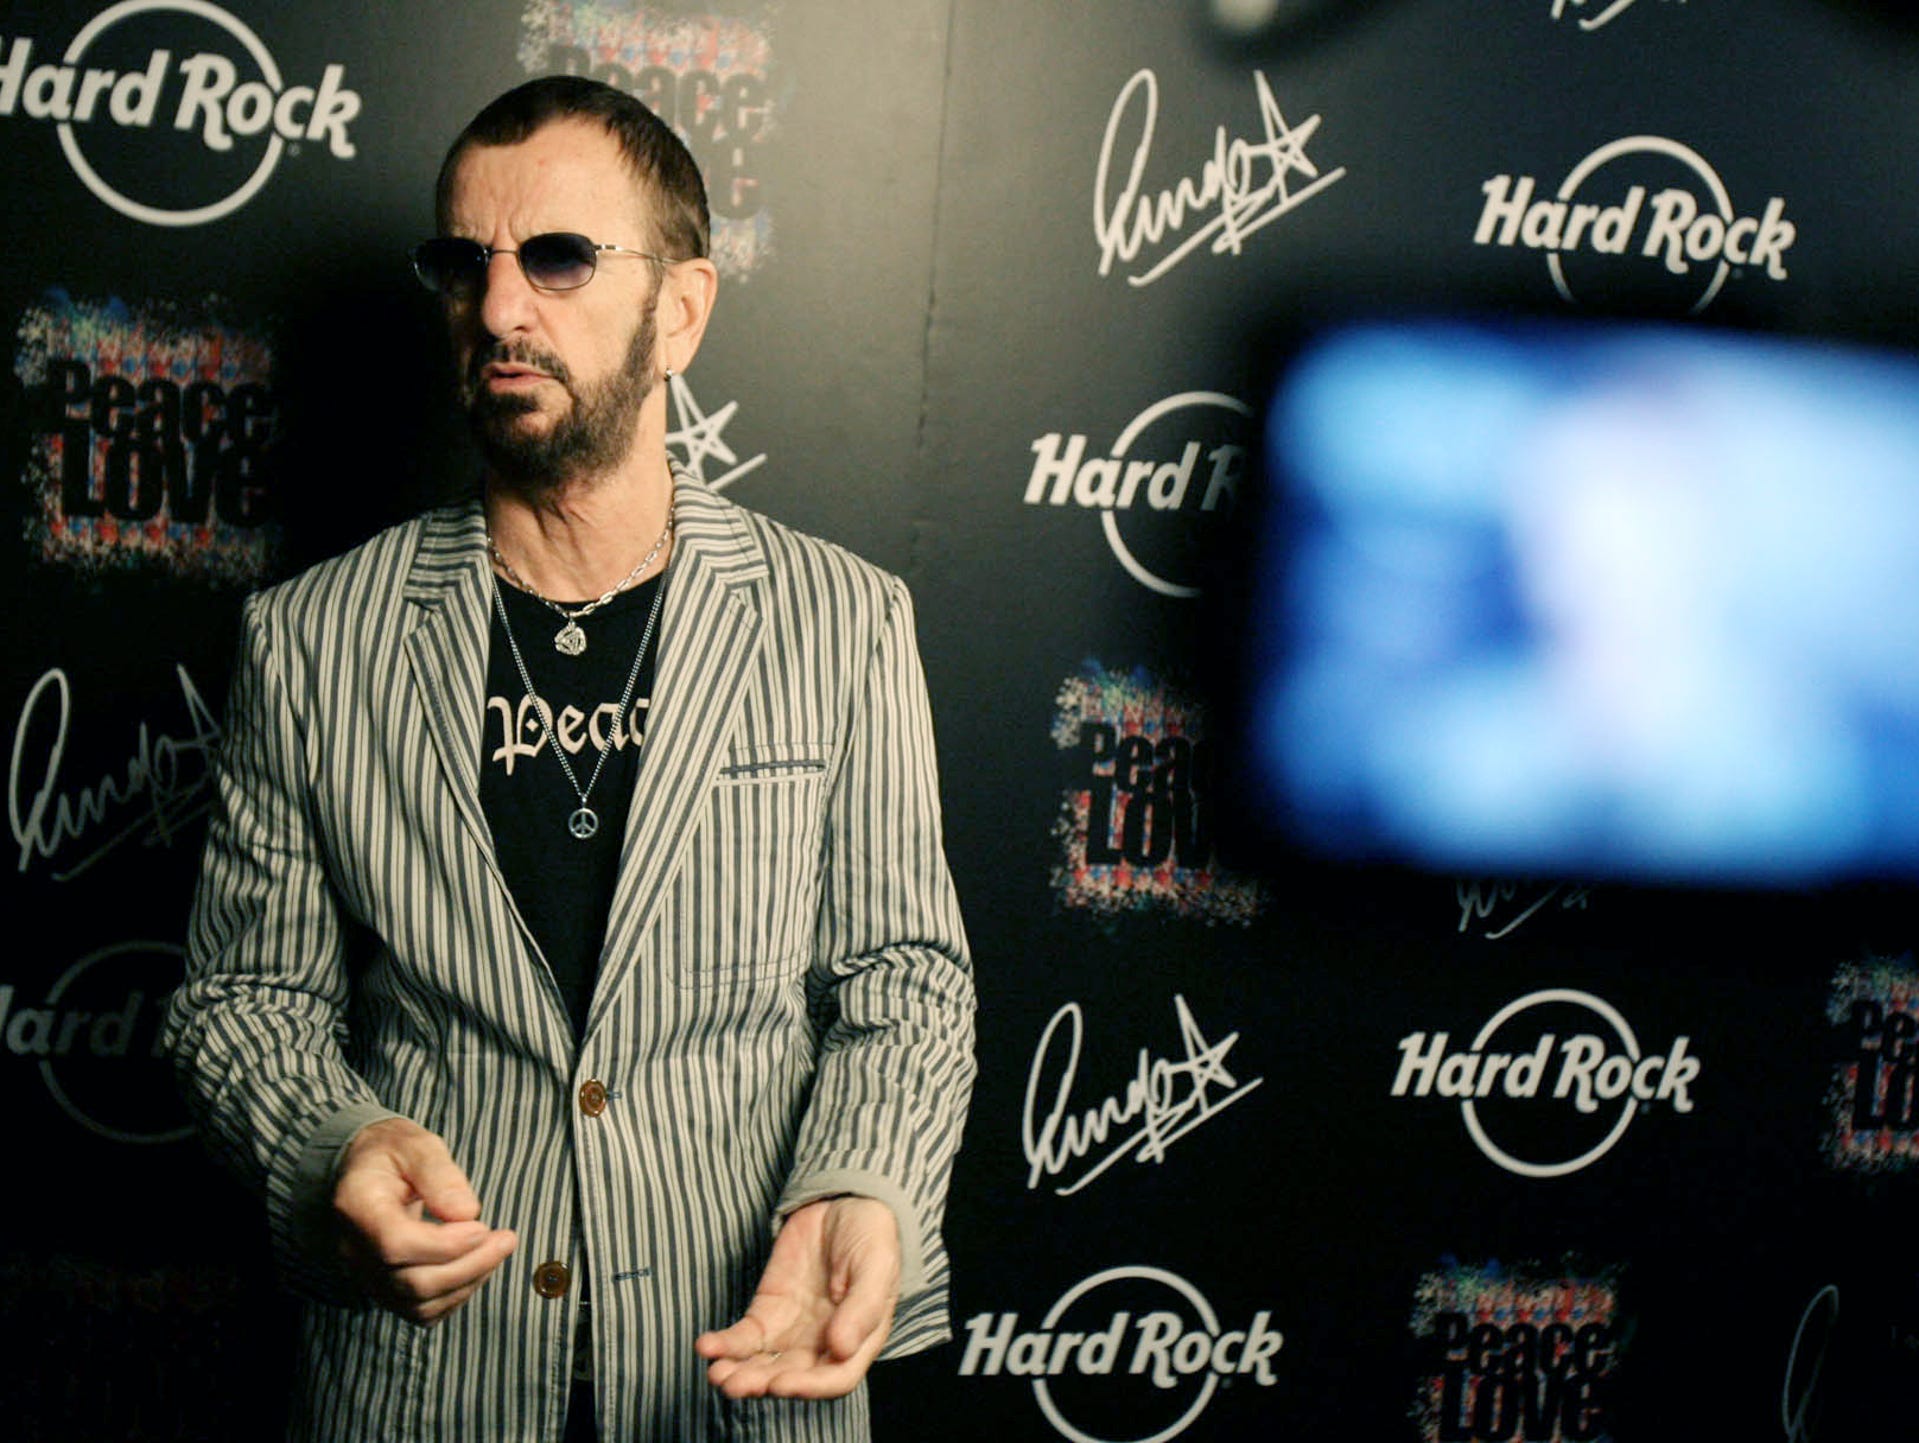 Ringo Starr, once the drummer for legendary band The